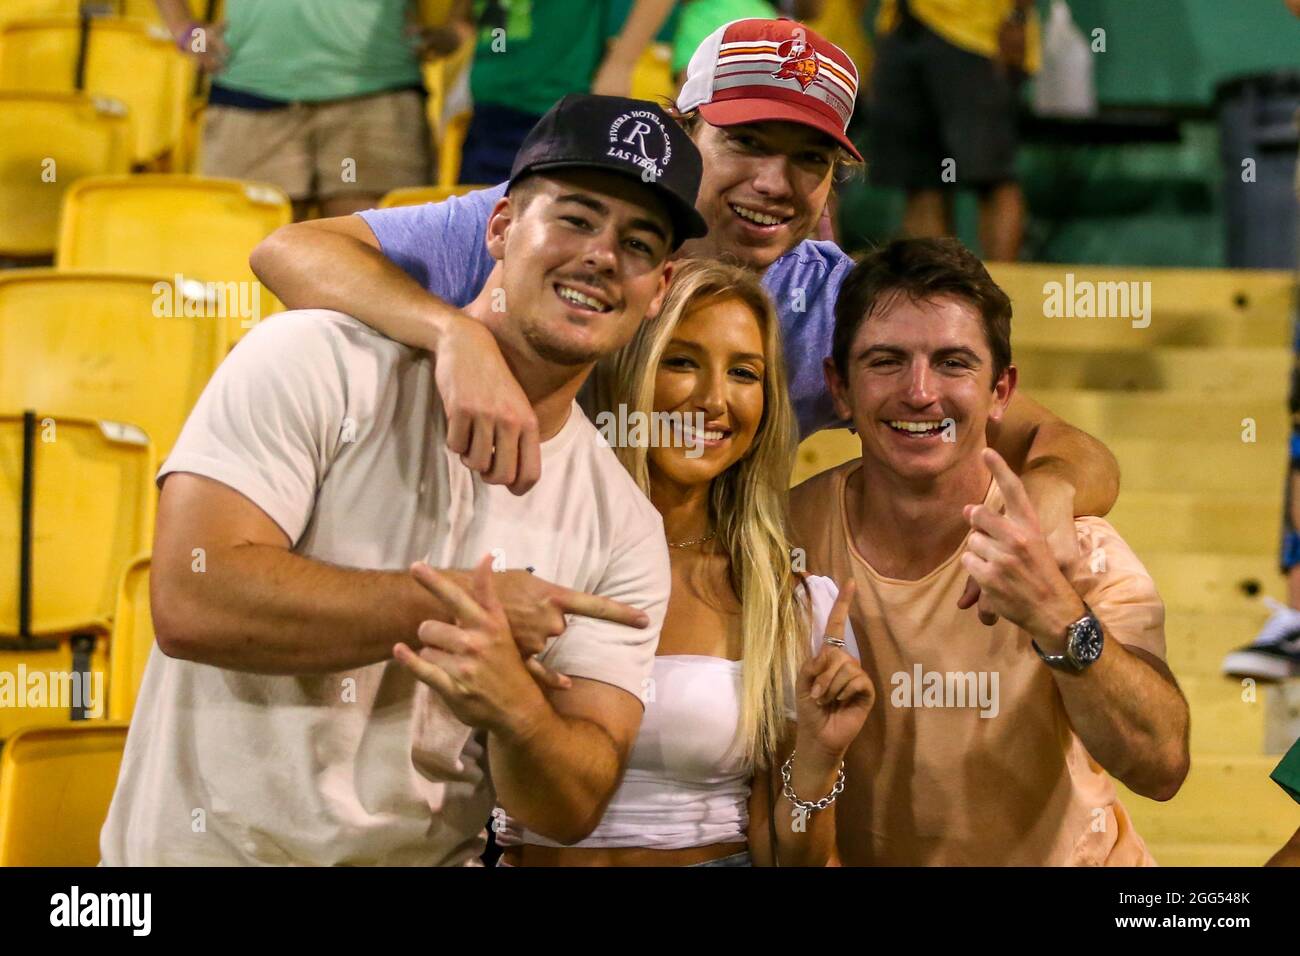 St. Petersburg, FL USA;  A group of friends enjoying a Saturday evening during a USL soccer game between the Tampa Bay Rowdies and the Charlotte Indep Stock Photo